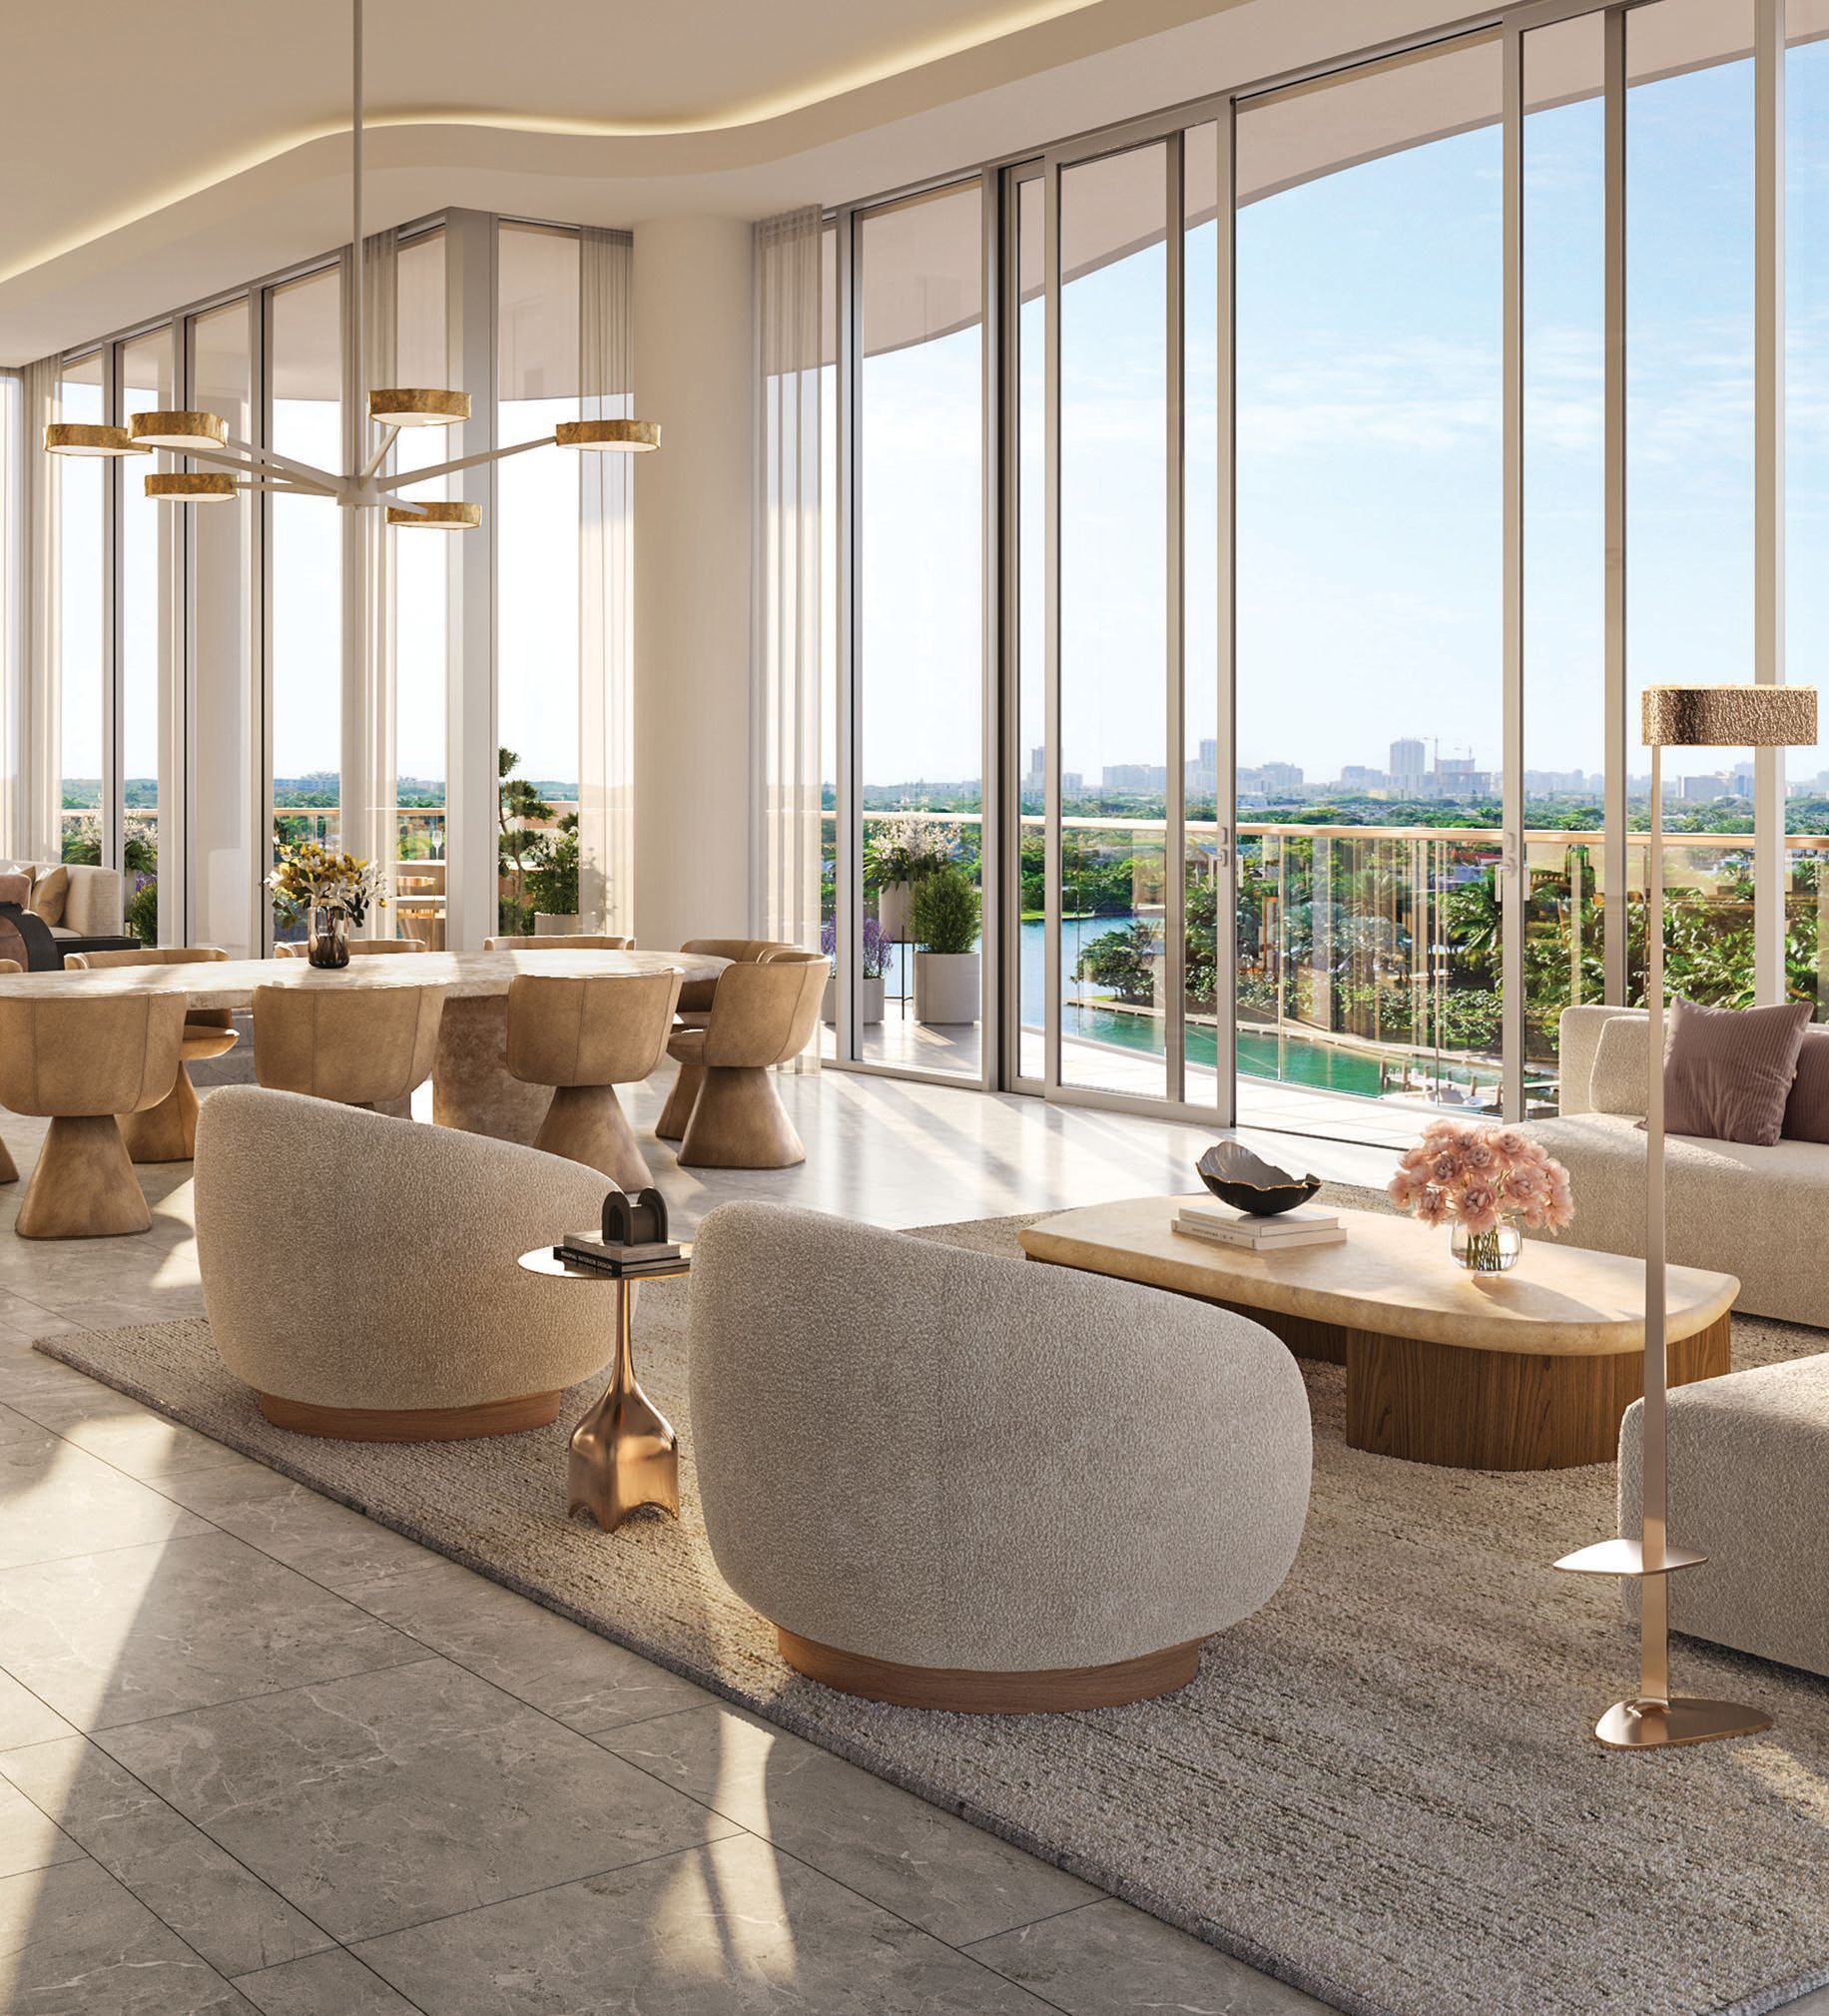 The most expensive unit, Penthouse 1, recently sold asking $12 million—a record-setting price for Miami’s Bay Harbor Islands. RENDERINGS BY WILLIAMS NEW YORK